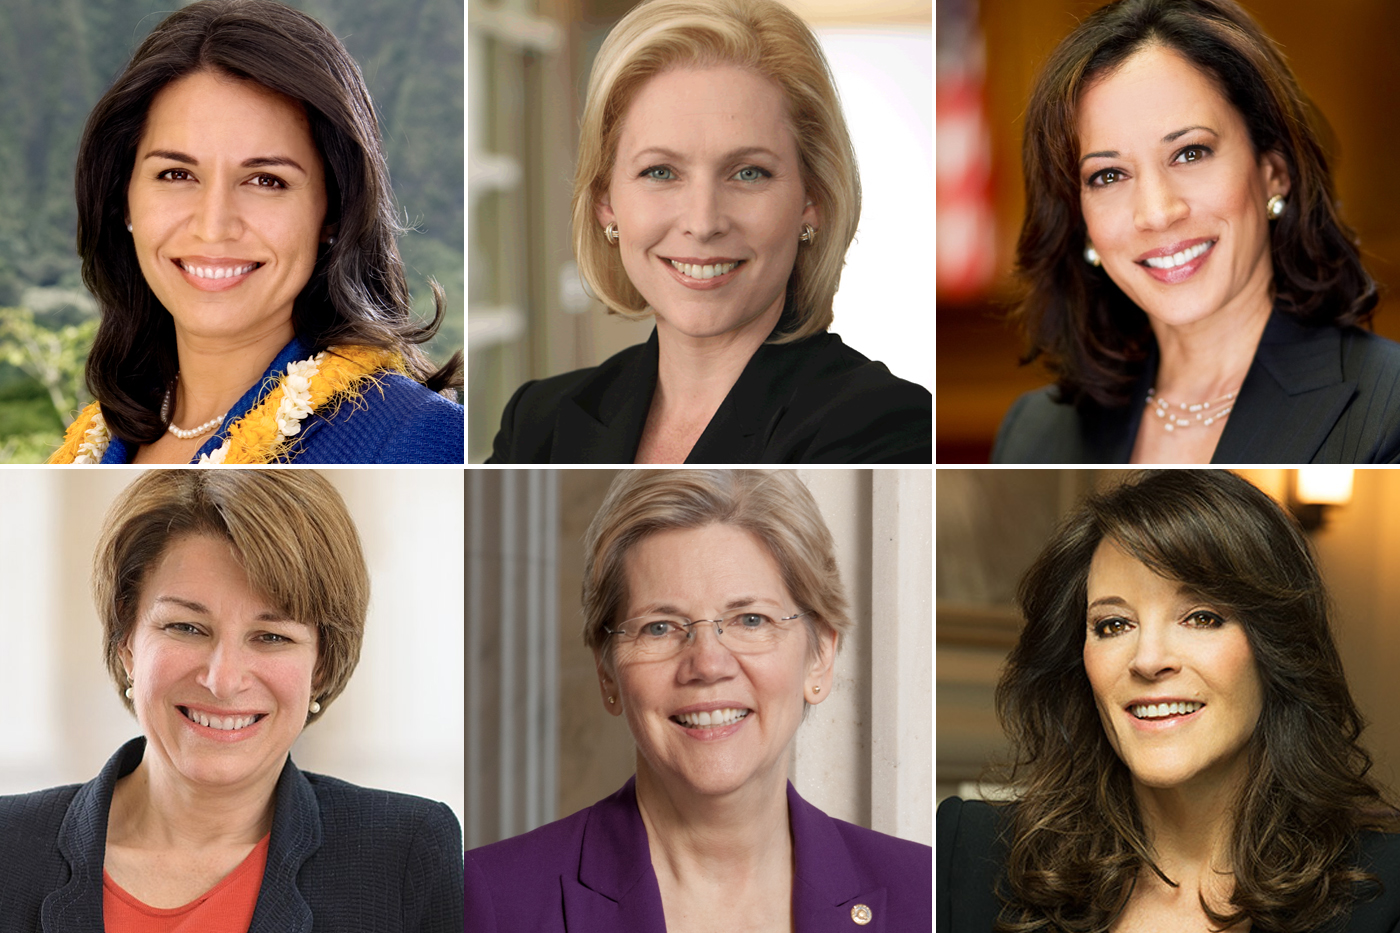 More Women Journalists Are Needed For The 2020 Presidential Election News Northeastern